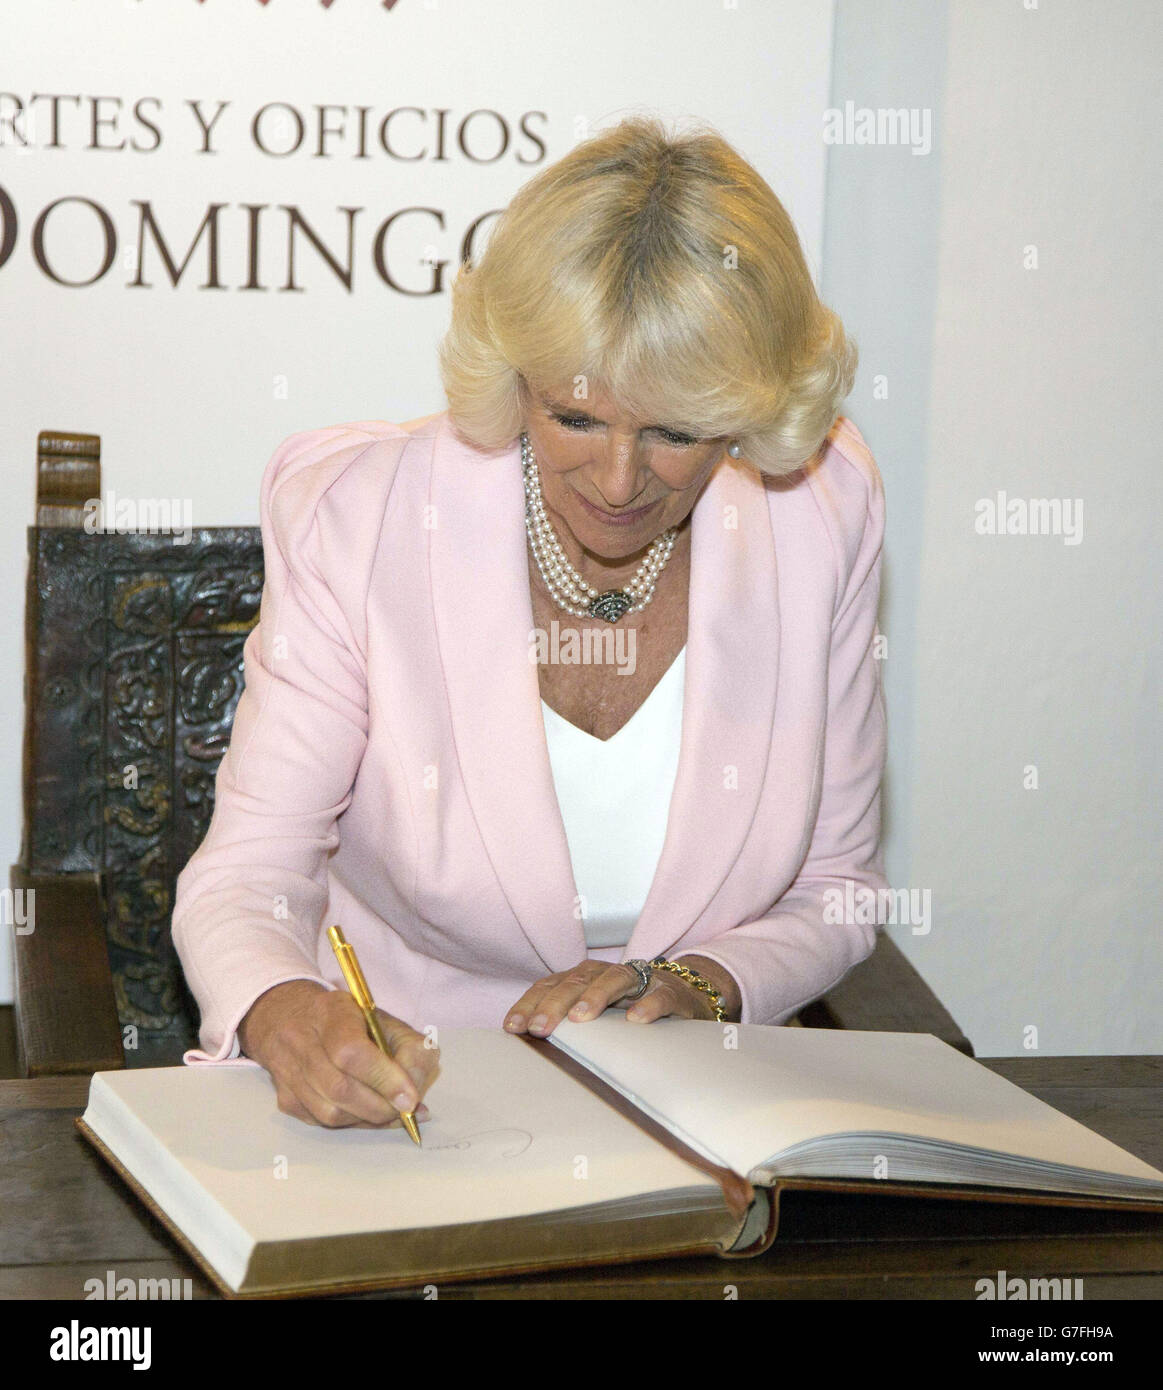 The Duchess of Cornwall signs the guestbook during a visit to the Euela de Artes Y Oficios, arts and crafts school in Bogota, Colombia. Stock Photo